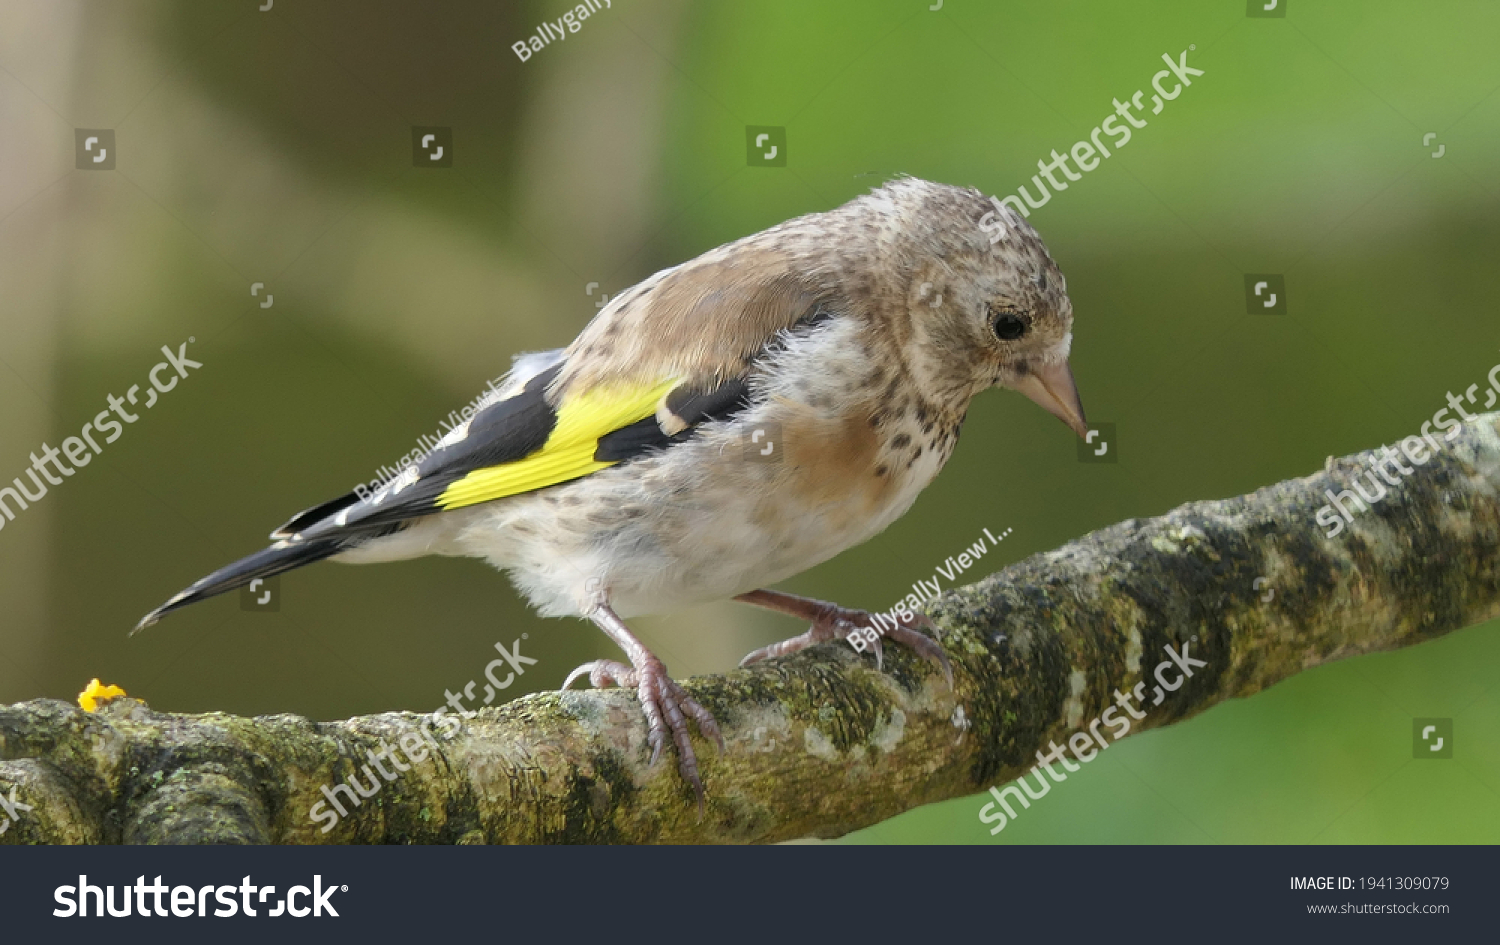 Goldfinch Juvenile on a branch in a wood #1941309079